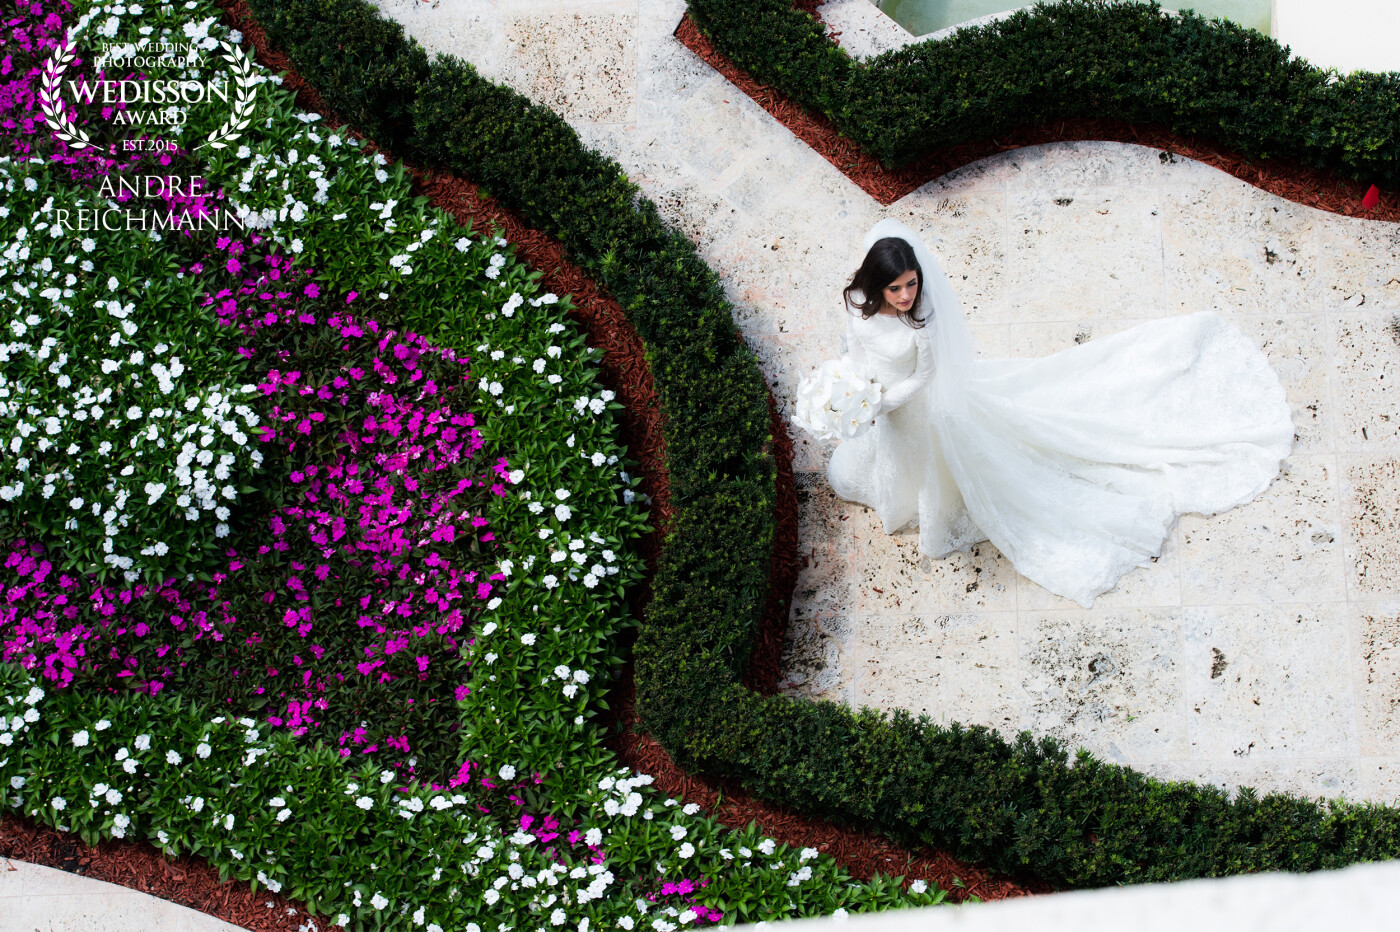 This incredible bride, paired with a beautiful venue, allowed us to capture one of a kind photos. This shot was taken from an overlook above the garden in the golf course, and we just the right look the dress and flowers looked stunning.